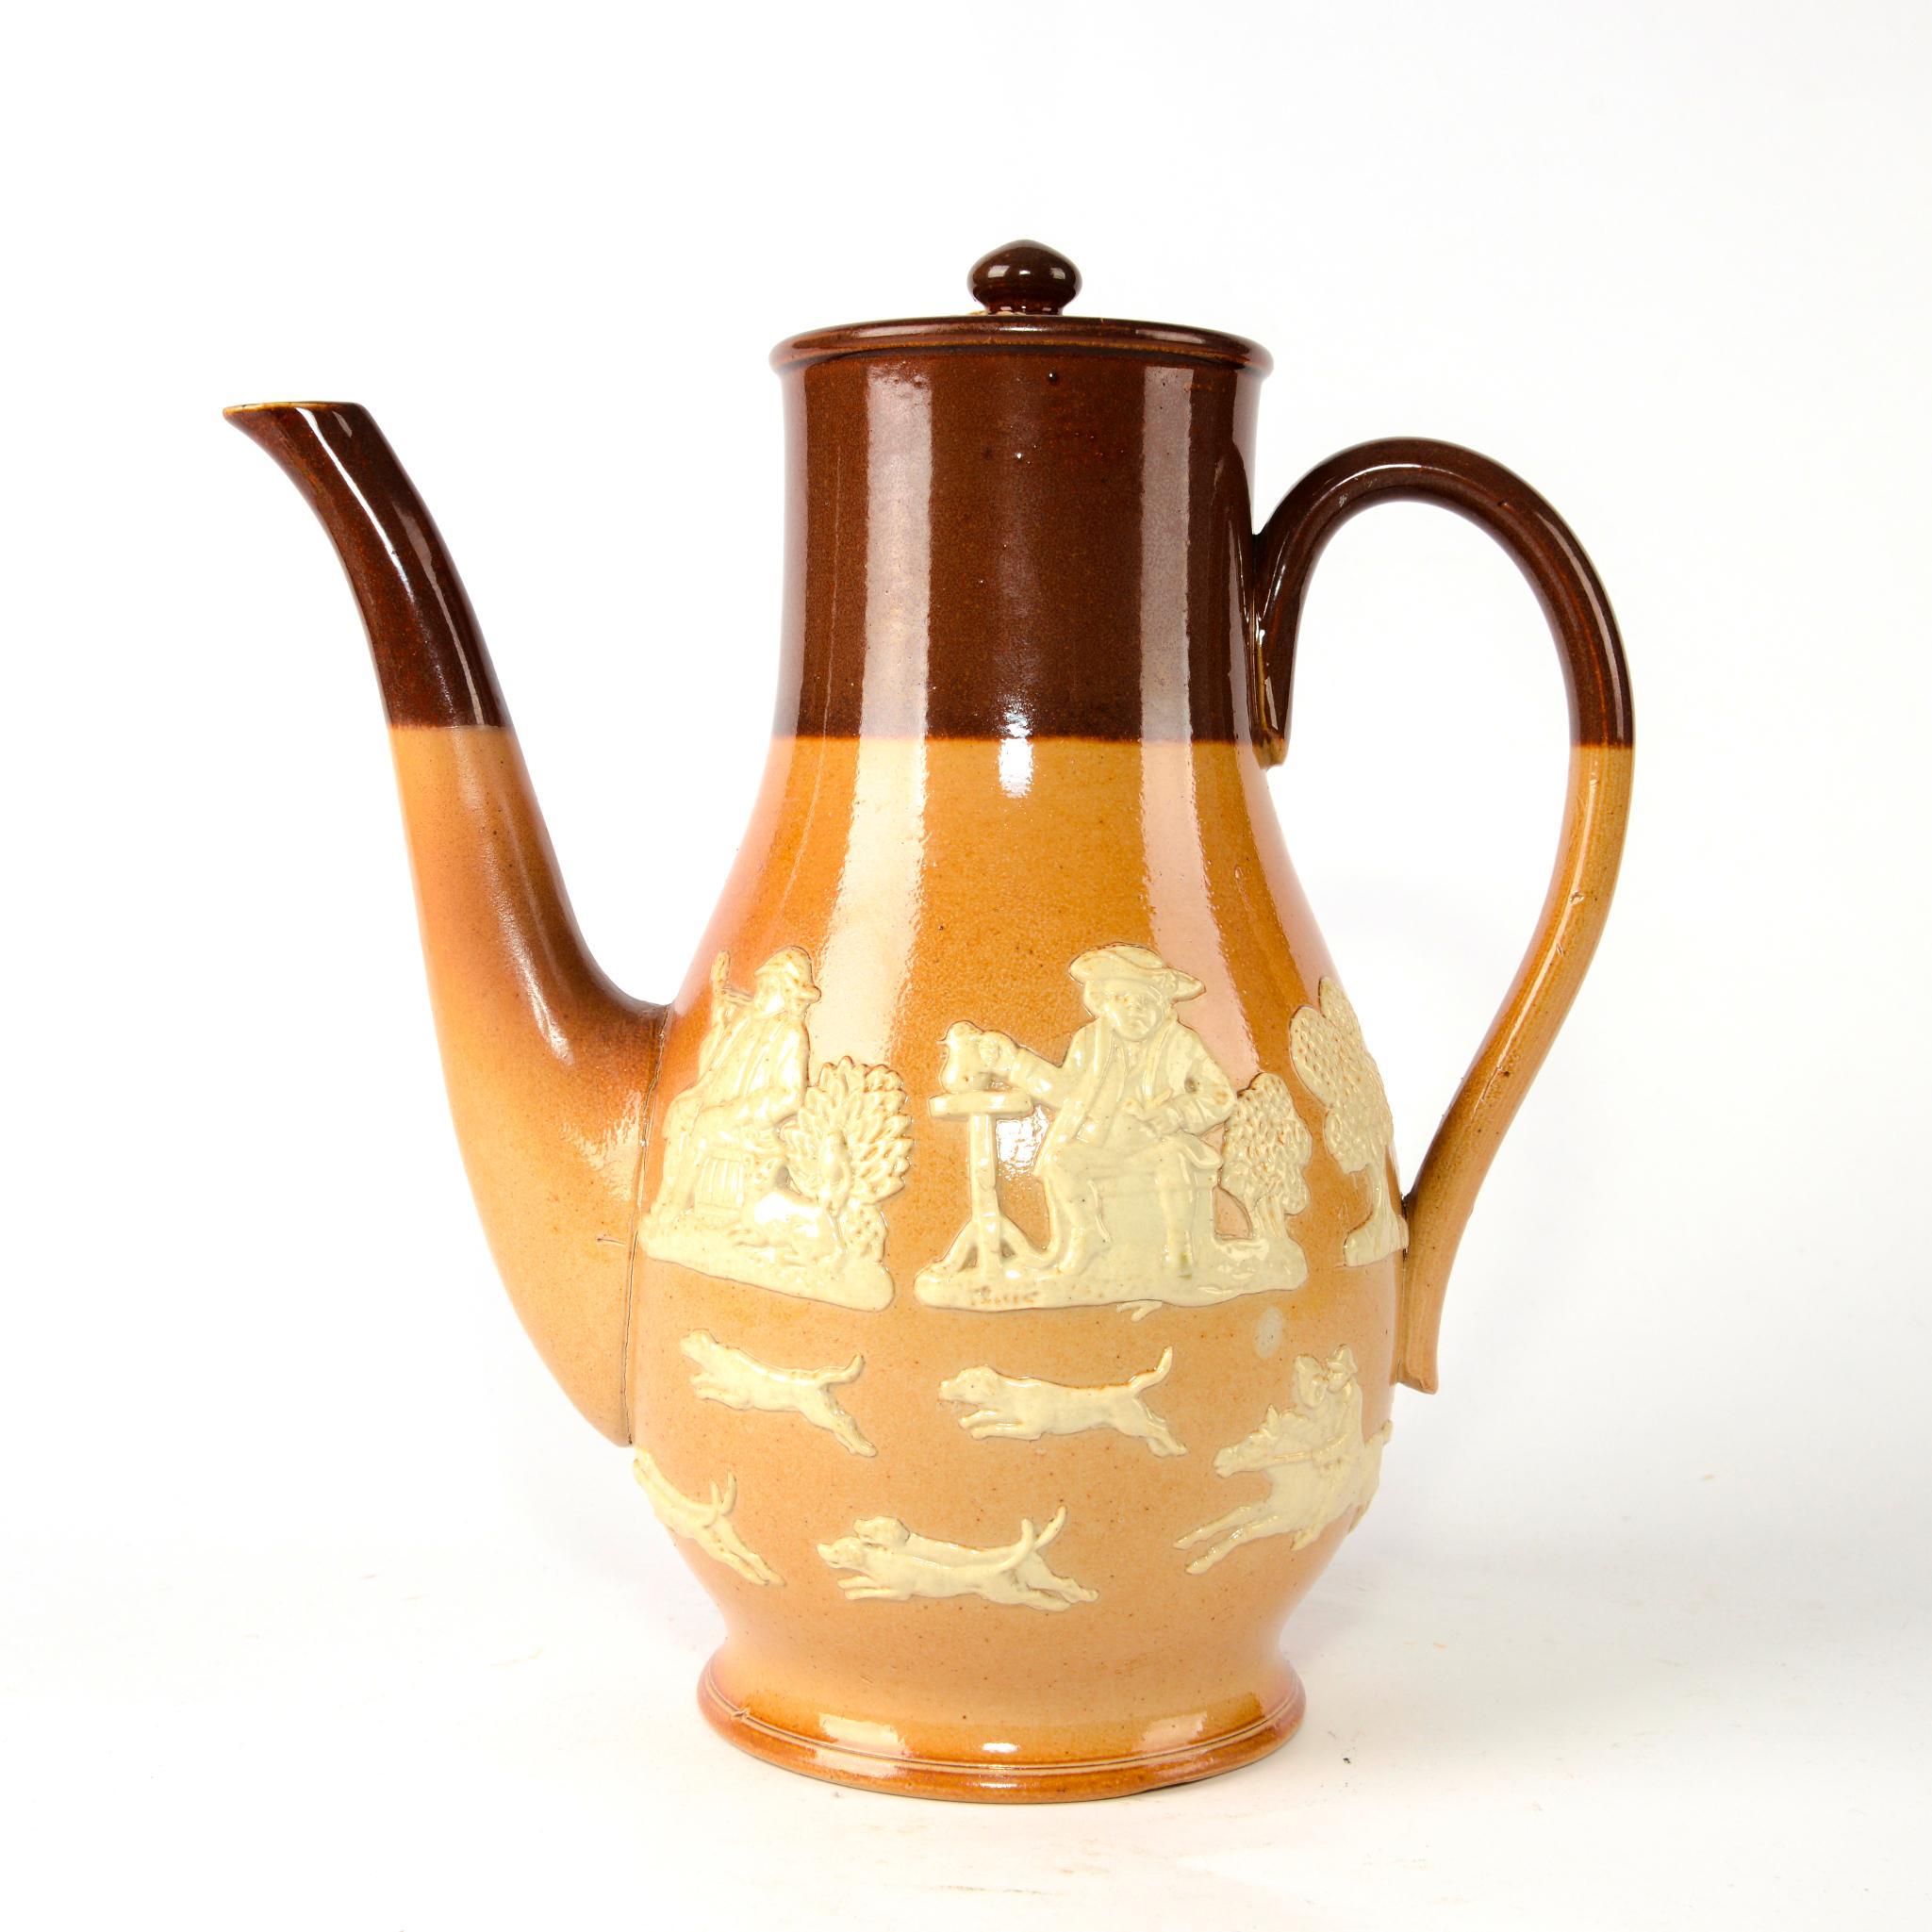 ROYAL DOULTON HUNTING WARE LIDDED COFFEE POT - Image 2 of 3